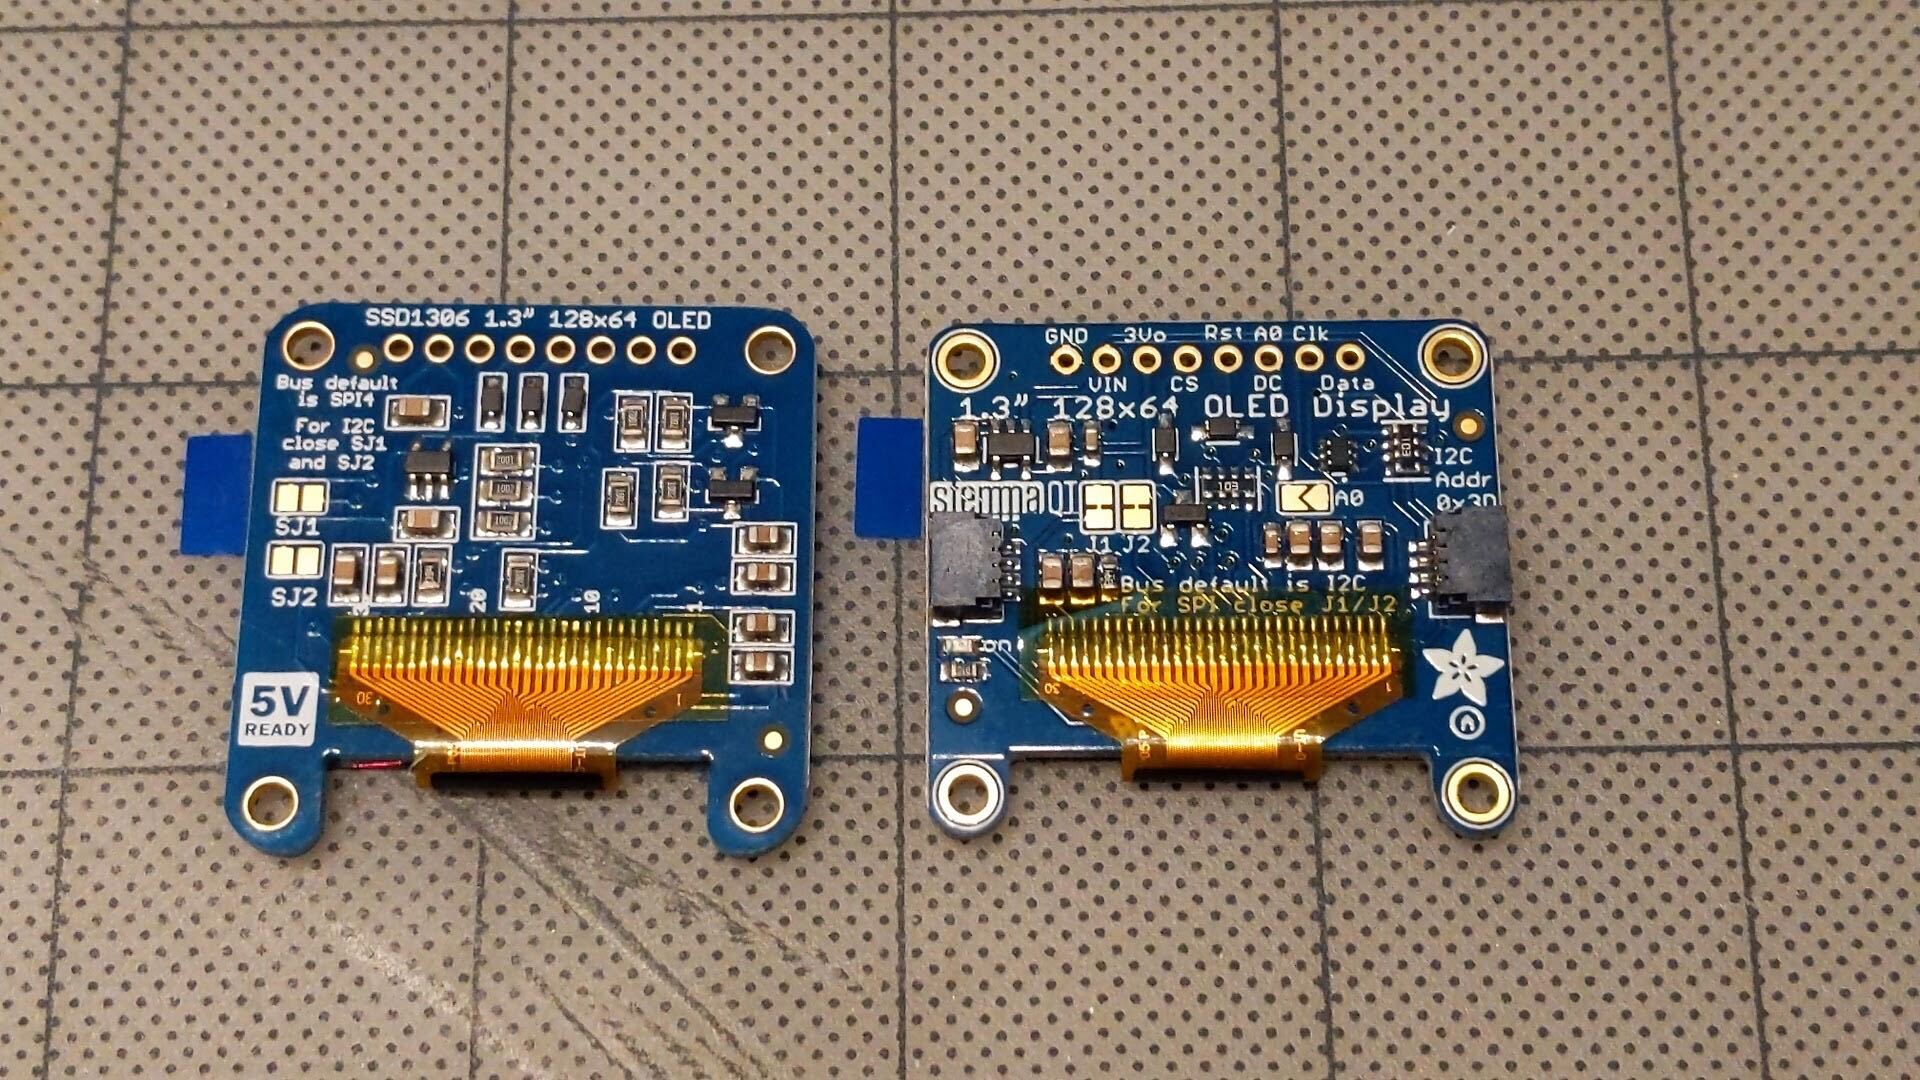 Old display with 5V Ready on left, new display with Ada Fruit on right